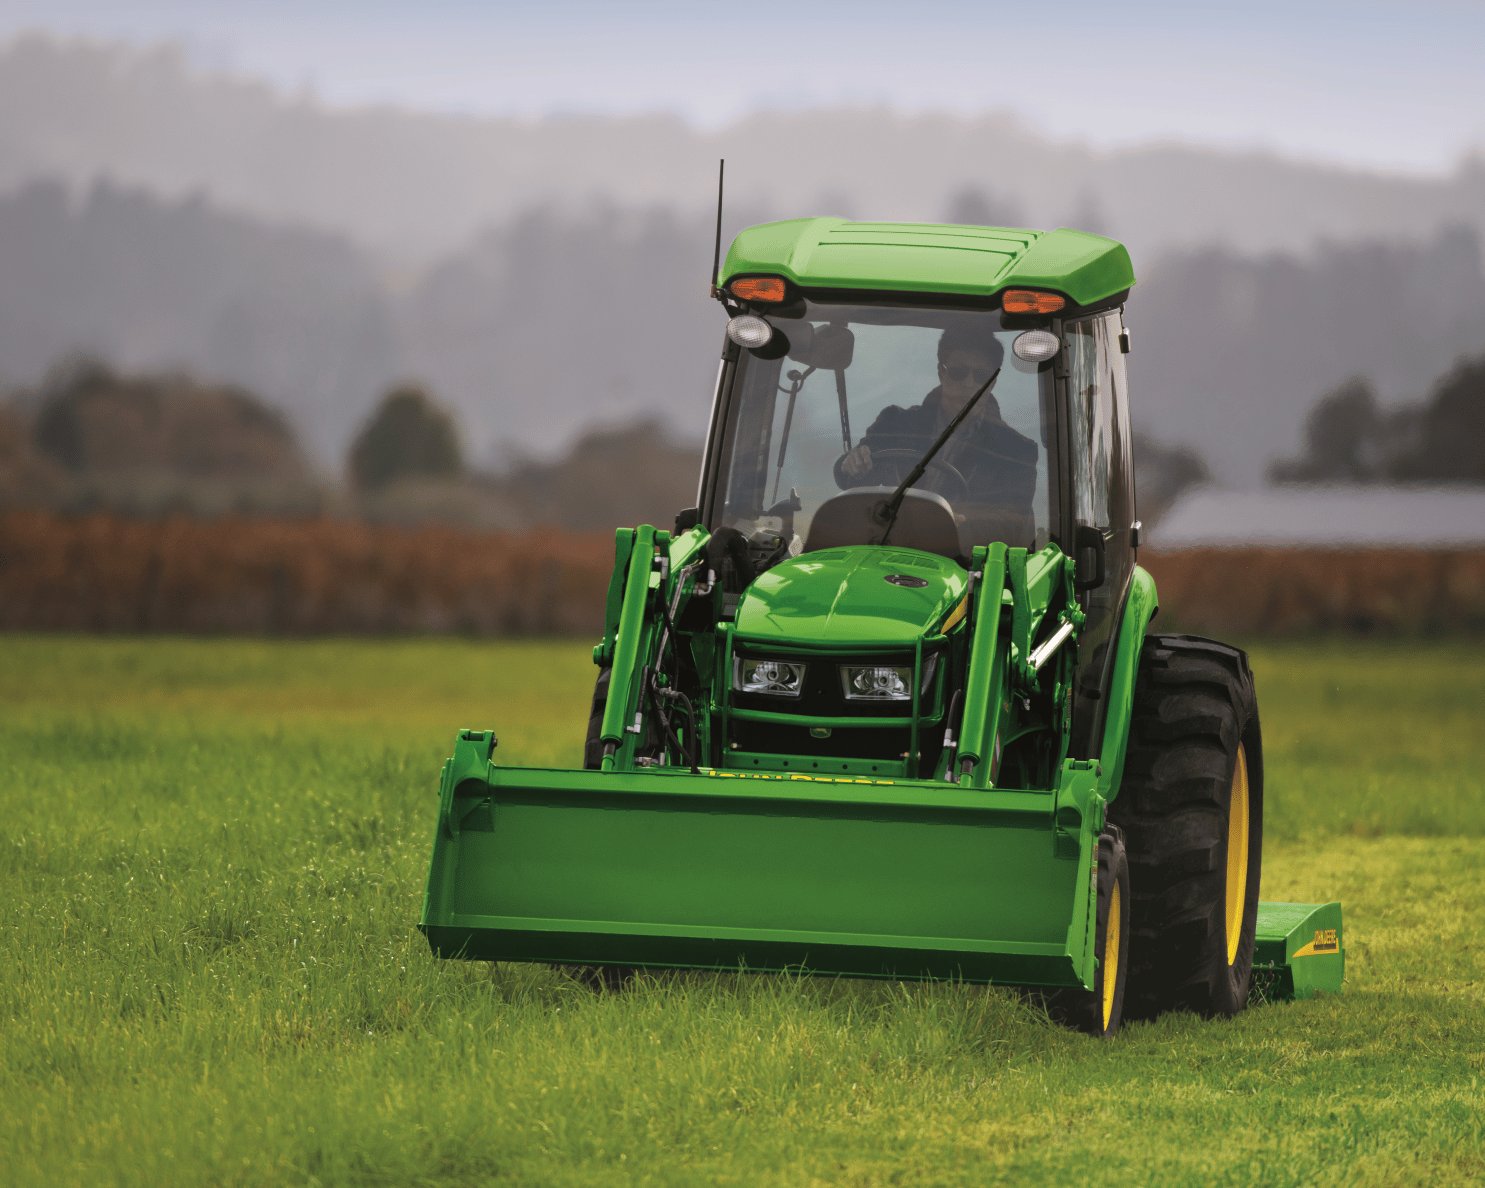 4052R Cab/Loader/Finishing Mower – “Bigger is Better with AC Package”